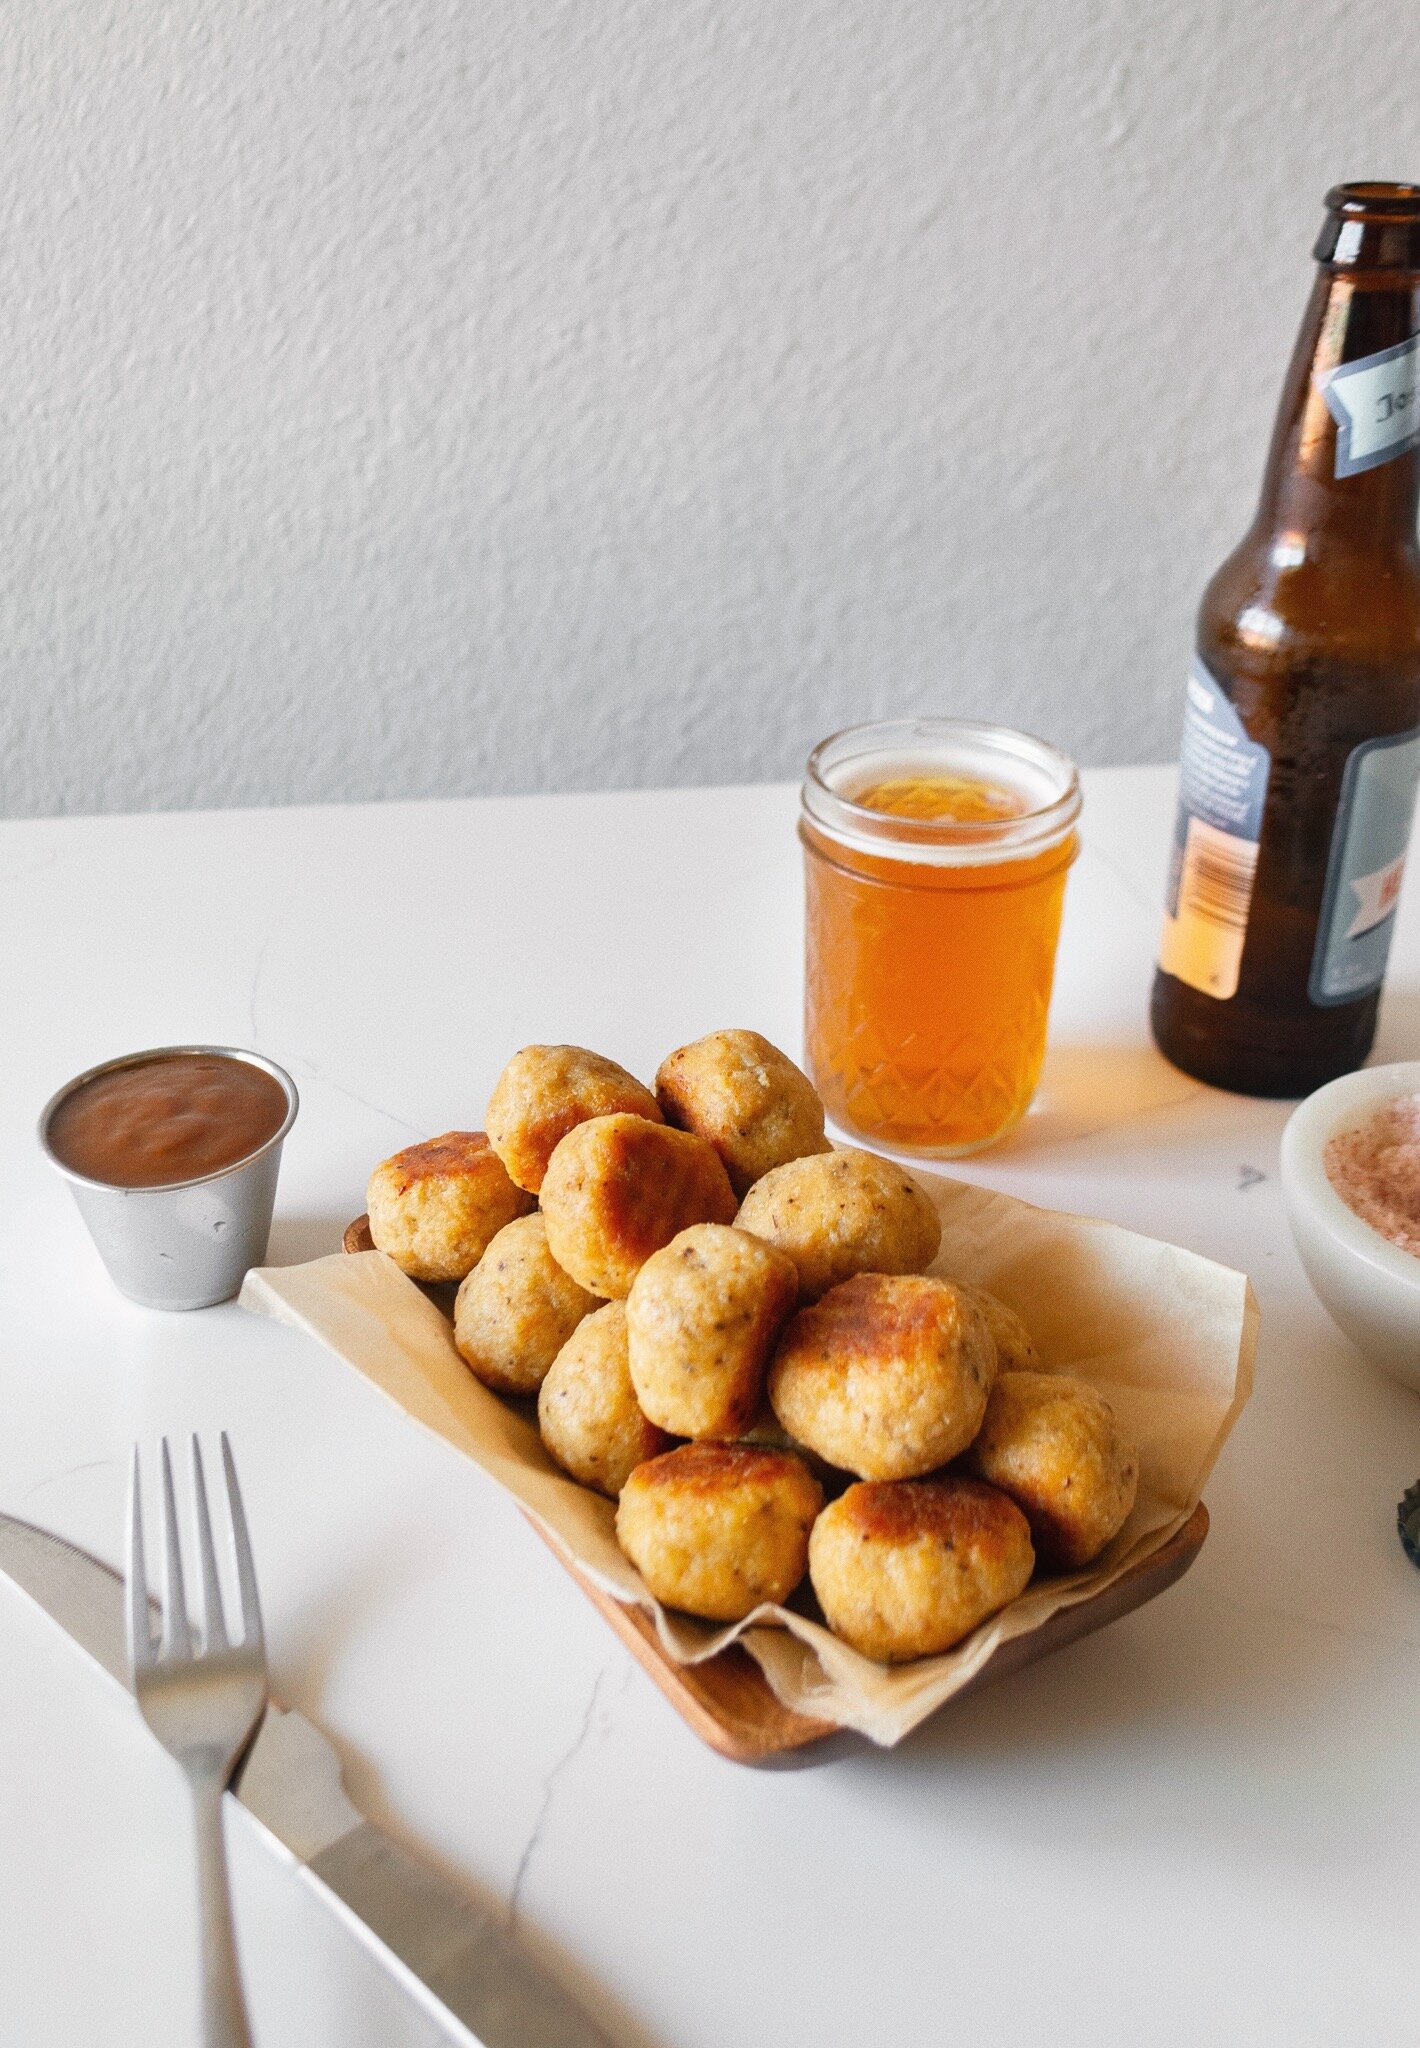 Plated Juicy Oven-Baked Chicken Meatballs with a beer and dipping sauce